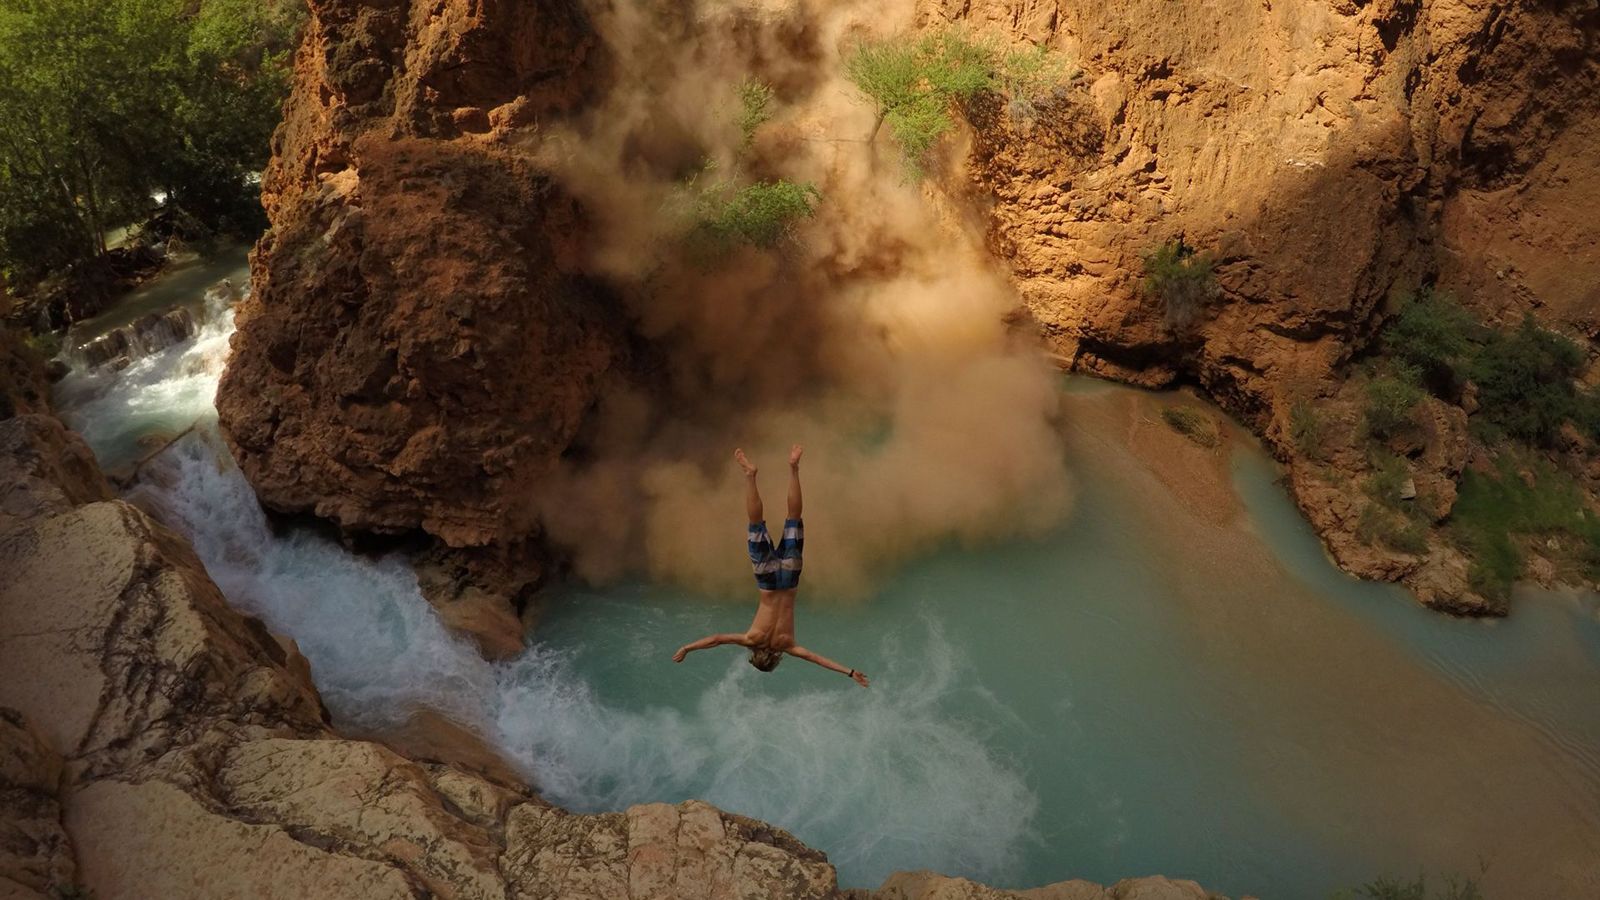 the best gopro photos in the world prepare to lose your breath image 44